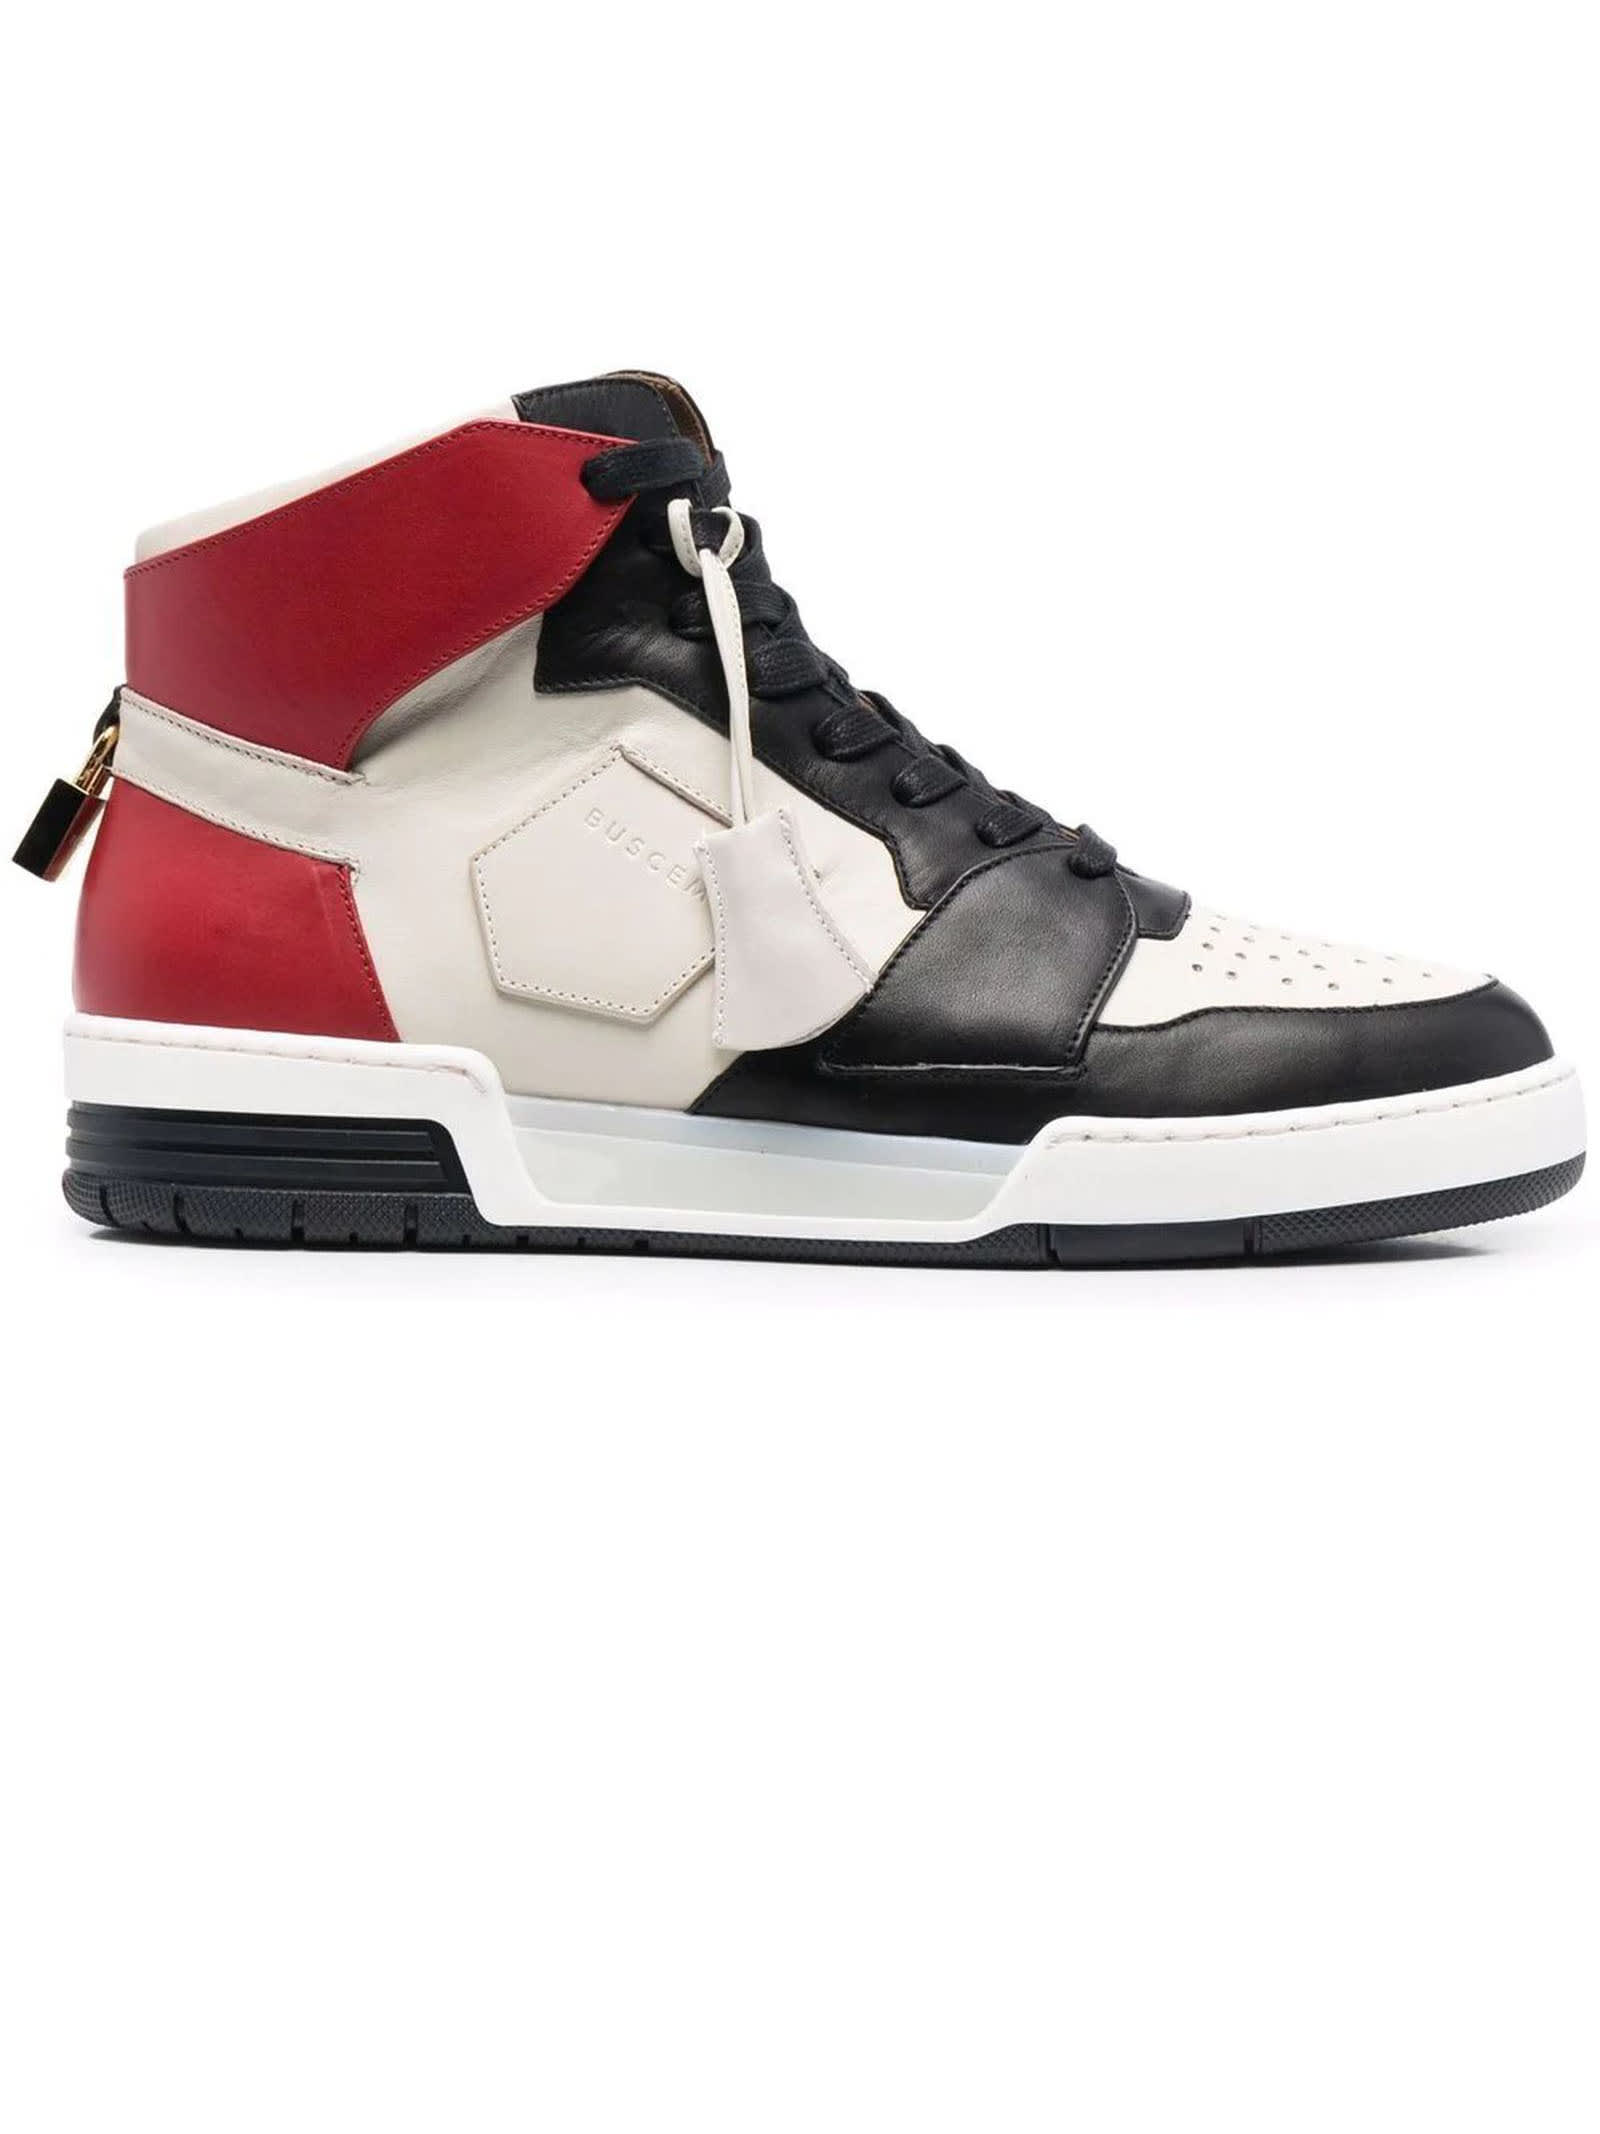 Buscemi White, Black And Red Leather Sneakers